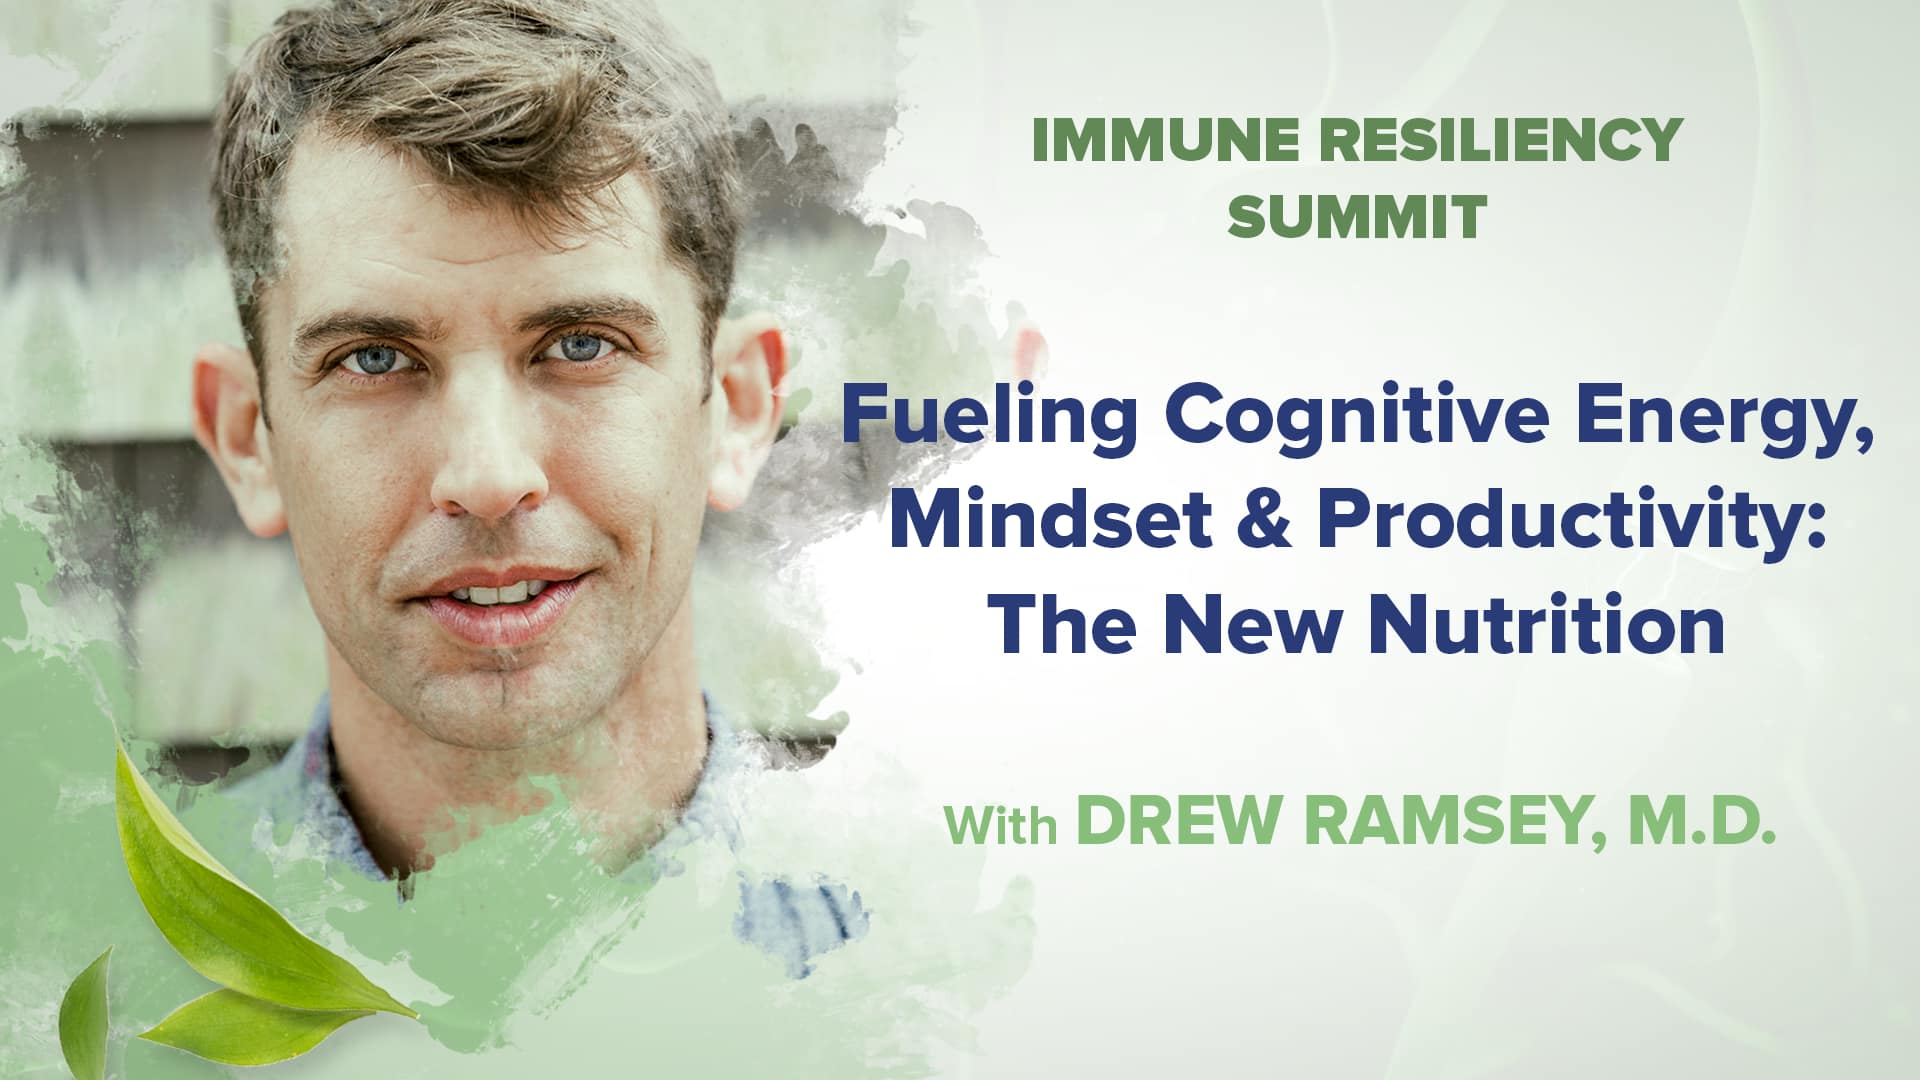 Fueling Cognitive Energy, Mindset & Productivity: The New Nutrition